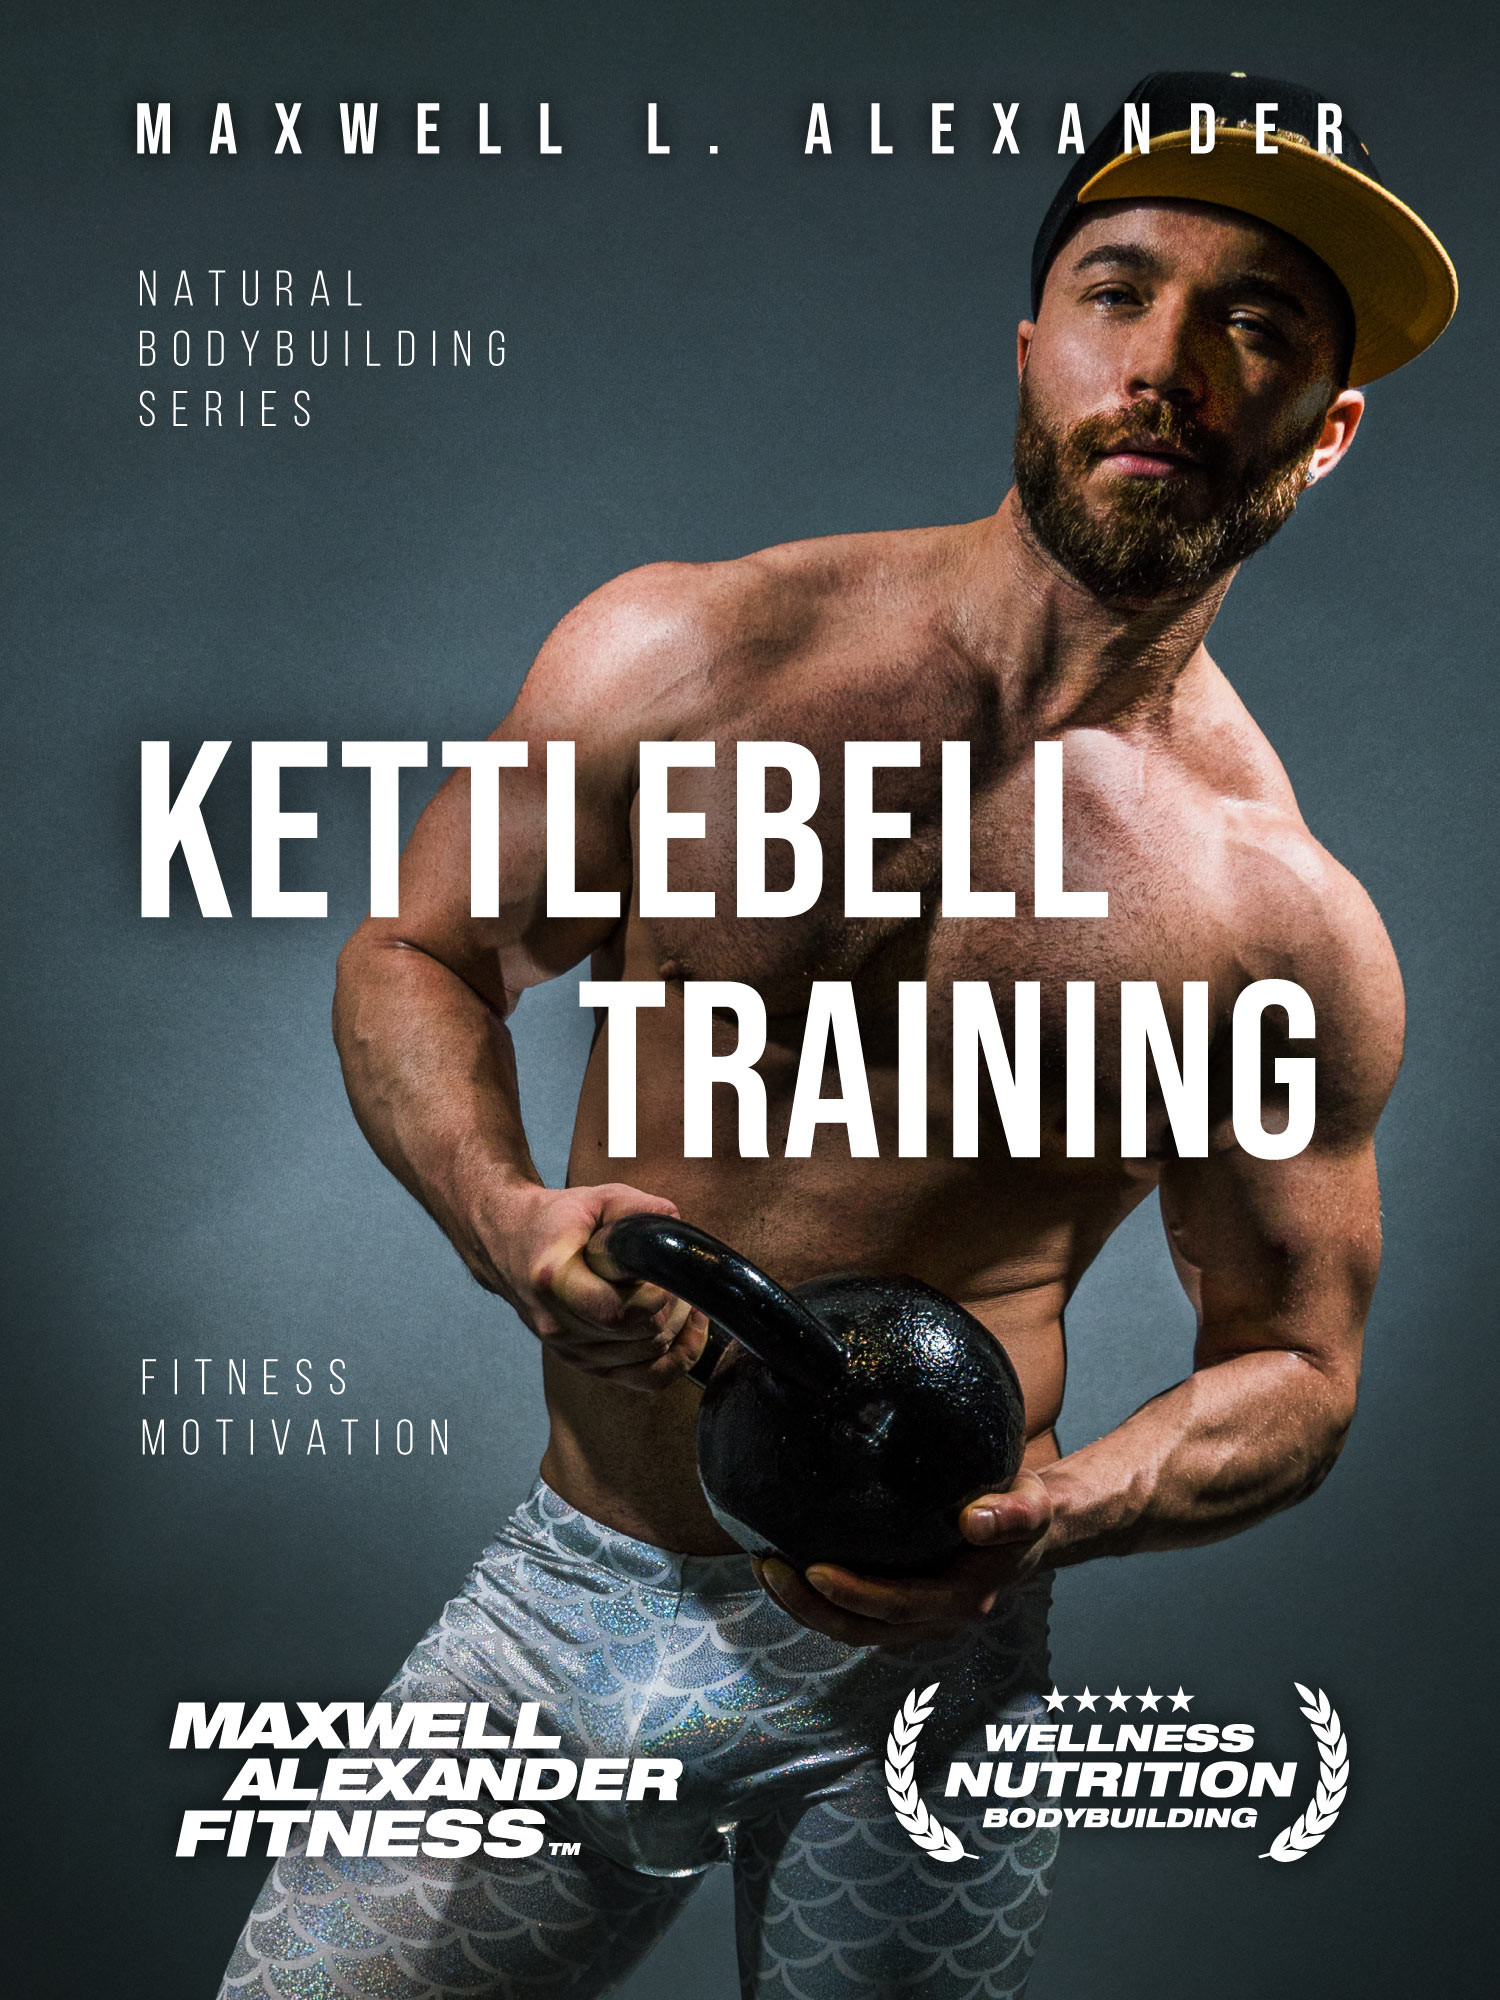 Top 8 Reasons Why You Need to Include Kettlebells in Your Workout Routine – Presented by “Kettlebell Training with Bodybuilding Coach Maxwell Alexander” on Amazon Kindle